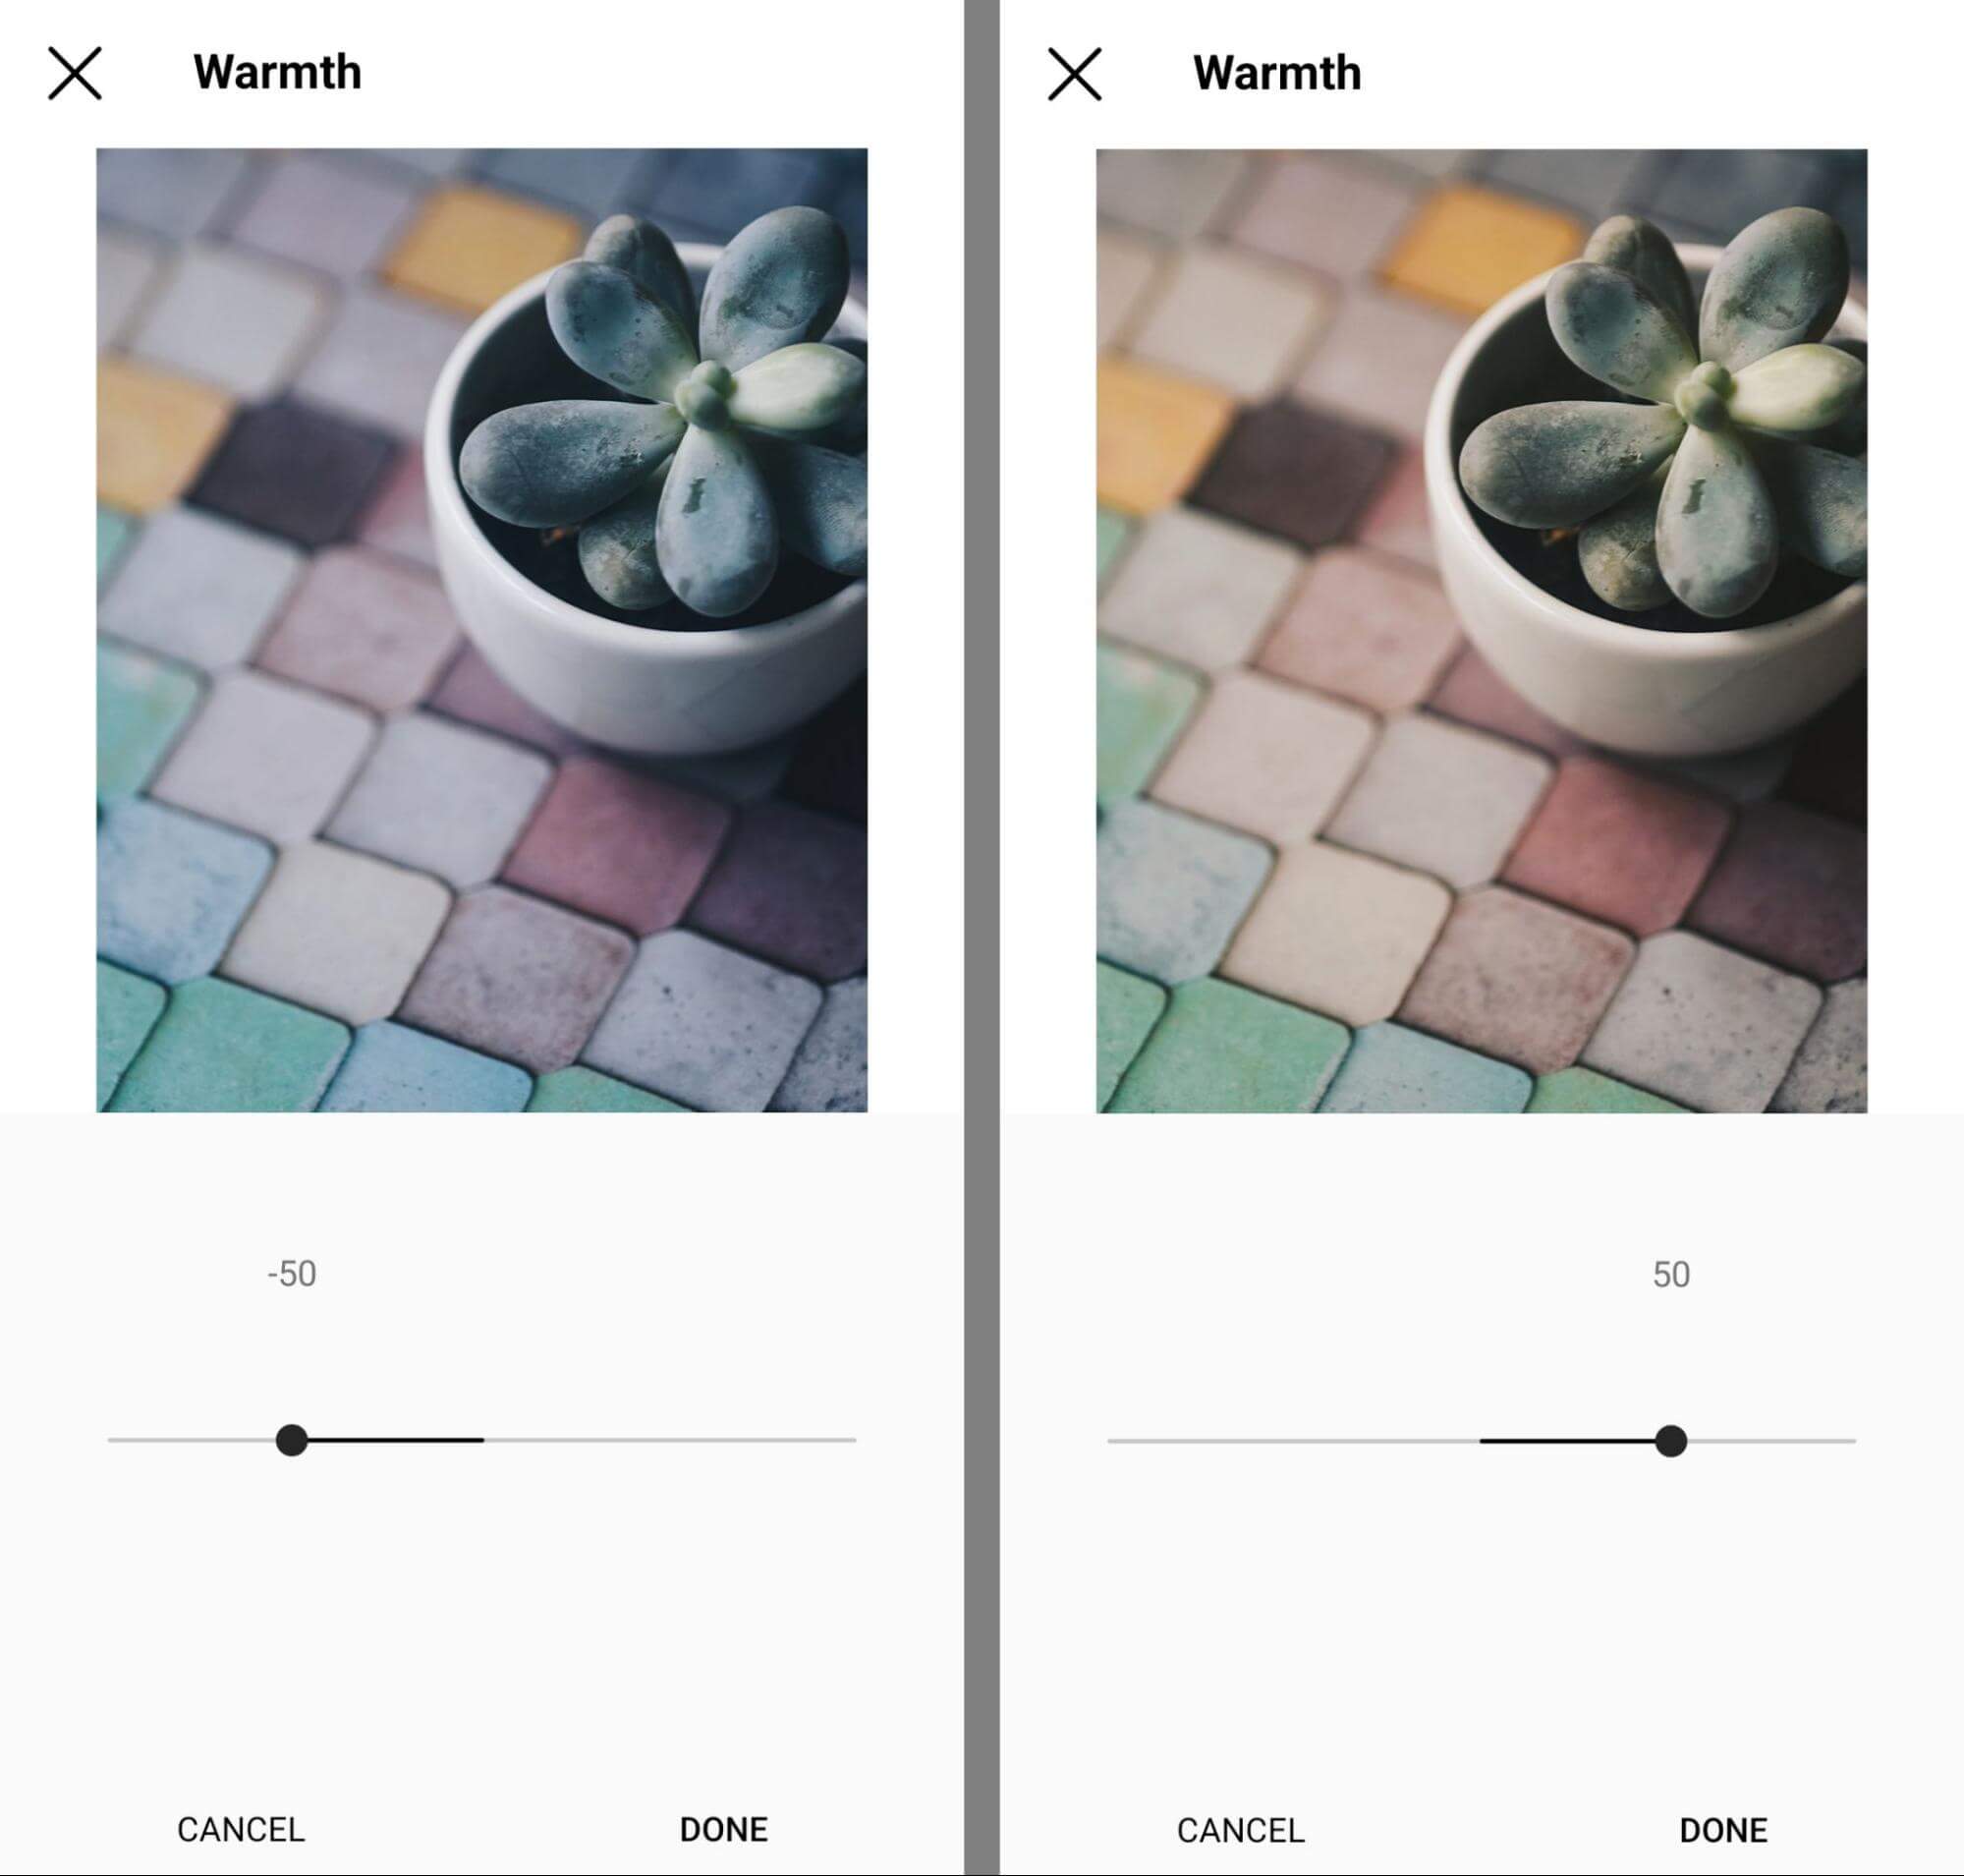 how-to-edit-photos-instagram-native-features-warmth-step-7